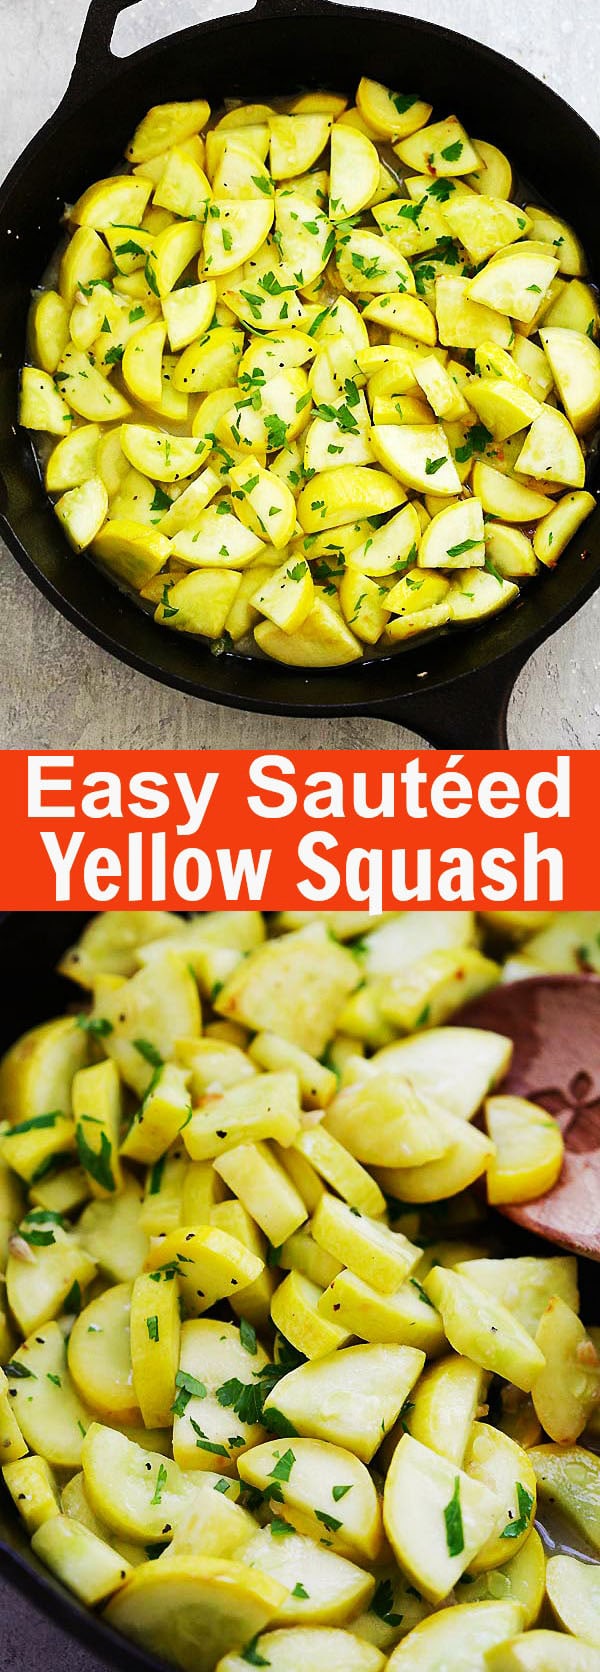 Sauteed Yellow Squash - easy sauteed yellow squash with garlic, butter and lemon. This easy recipe is fresh, delicious and takes only 10 minutes from prep to dinner table | rasamalaysia.com